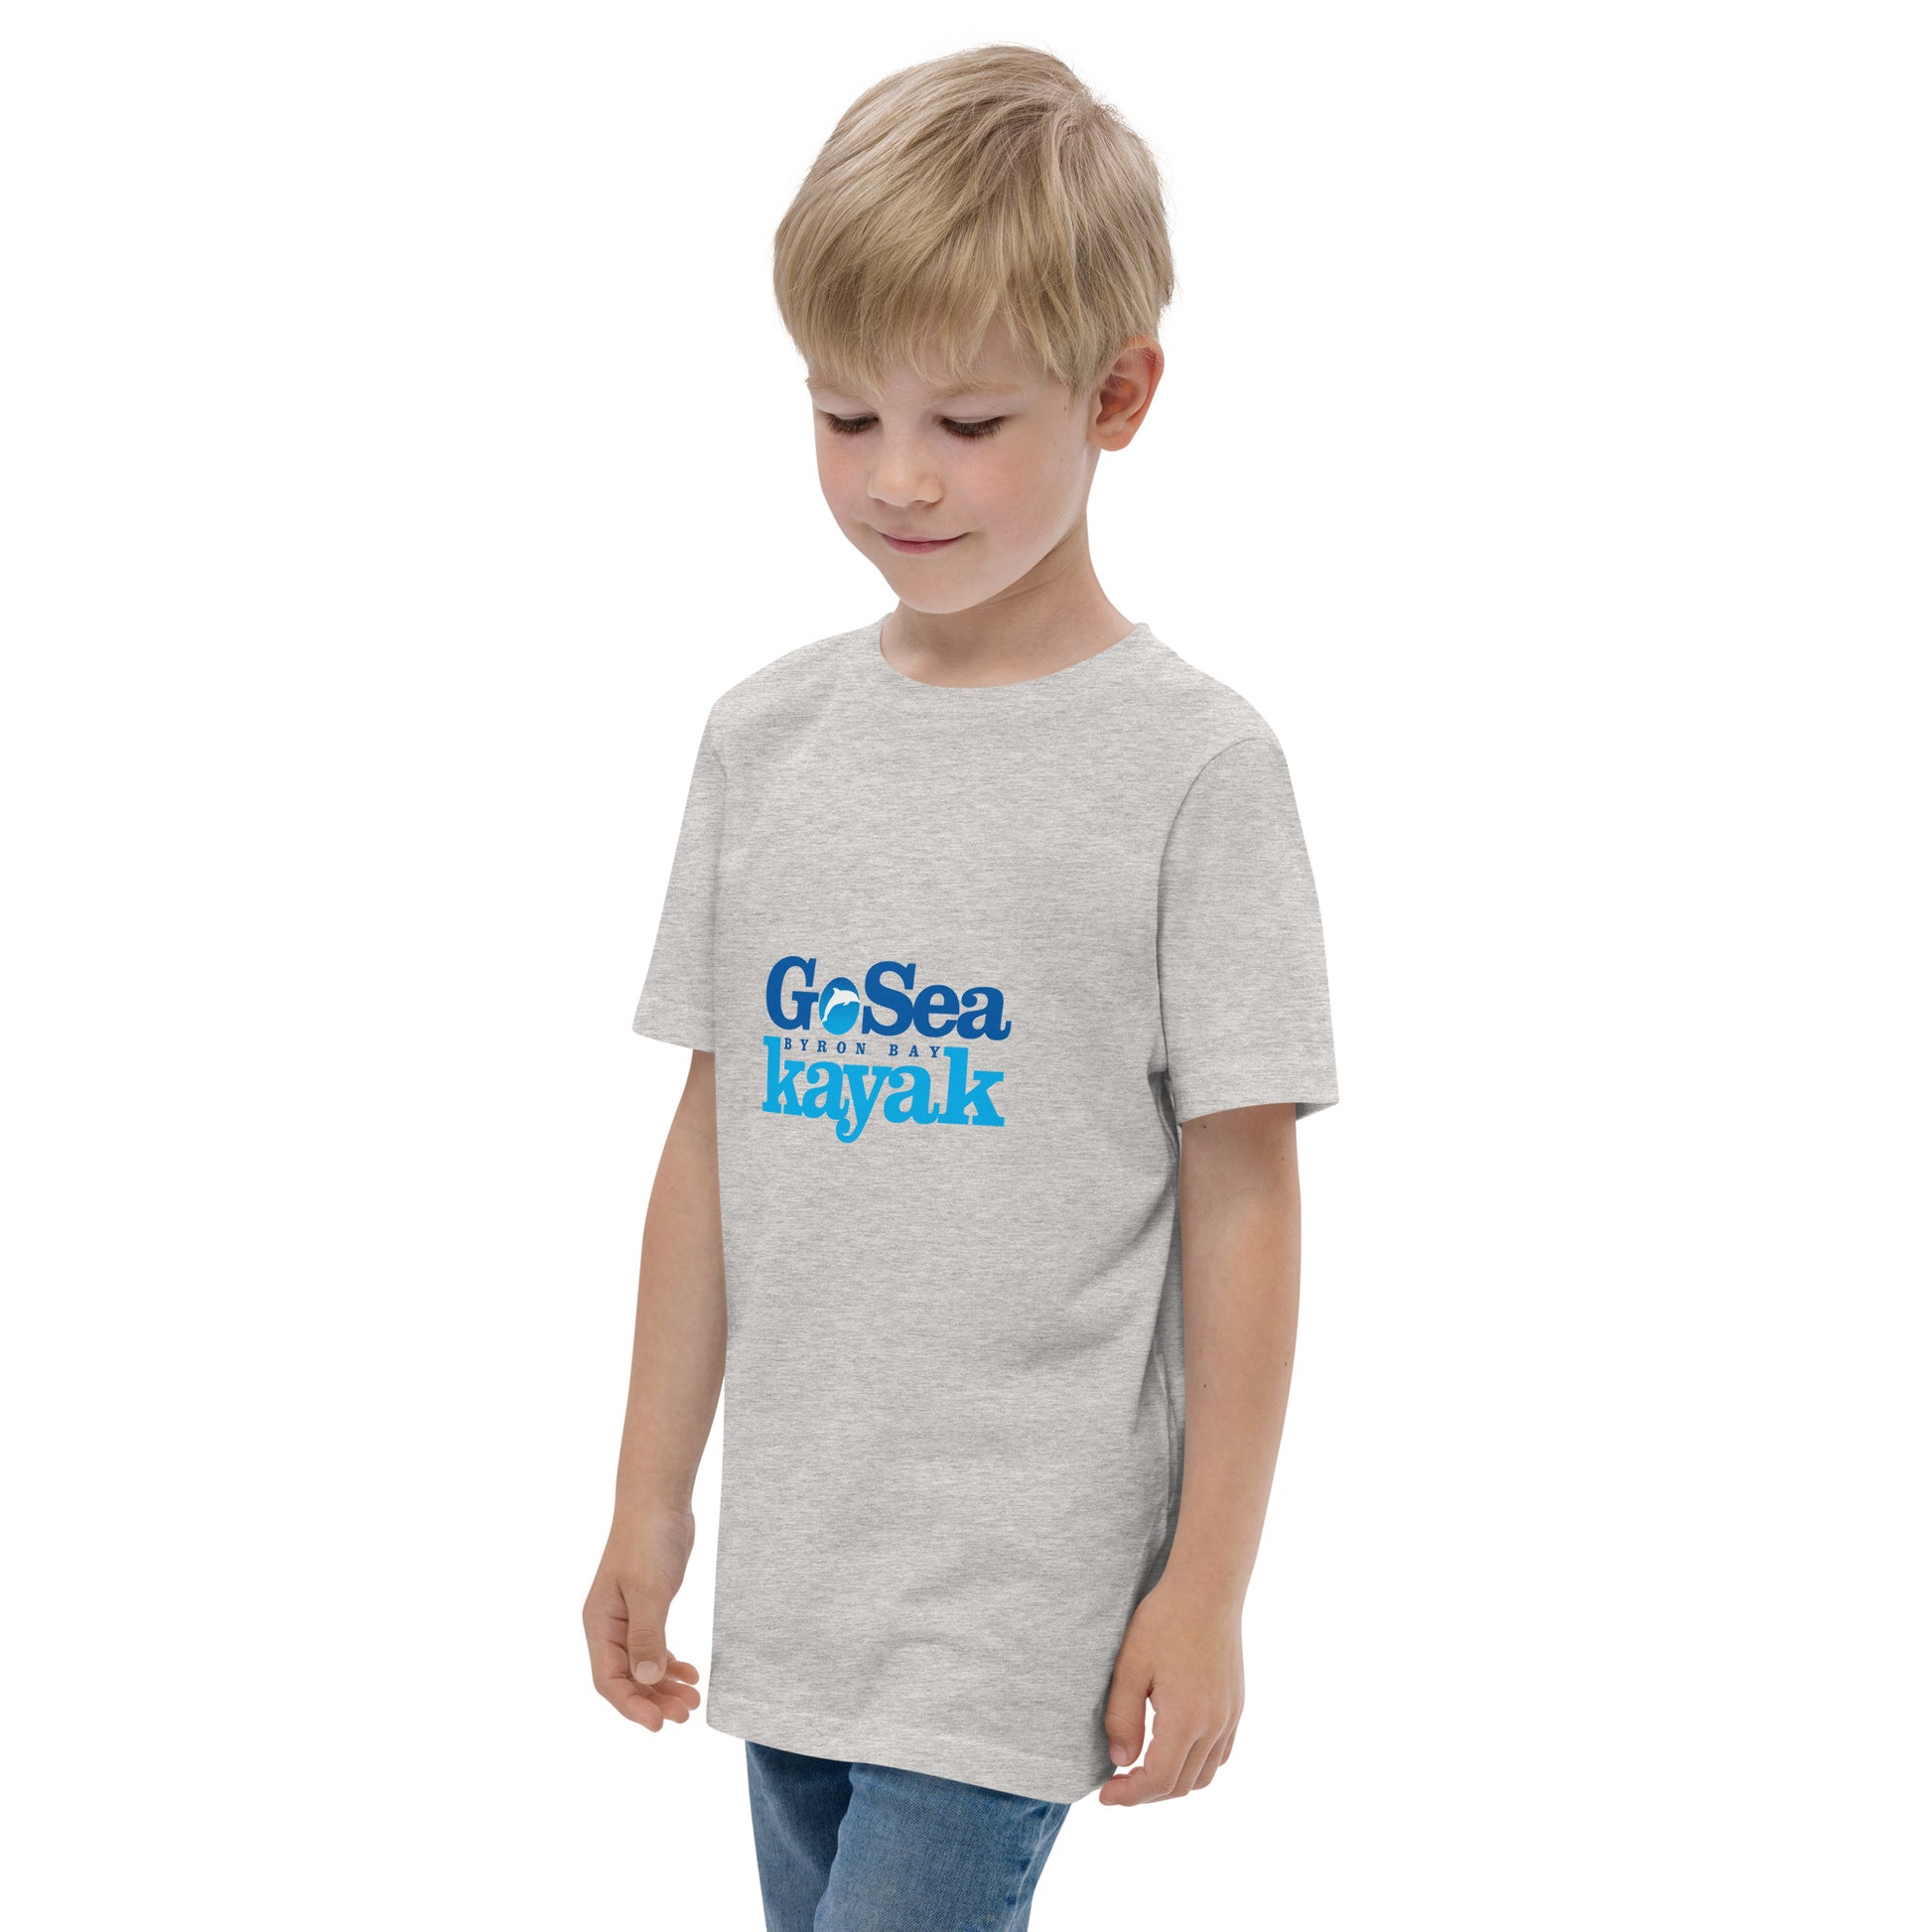  Kids T-Shirt - Natural / Heather colour - side view, being warn on boy standing with his arms by his side - Go Sea Kayak Byron Bay logo on front - Genuine Byron Bay Merchandise | Produced by Go Sea Kayak Byron Bay 